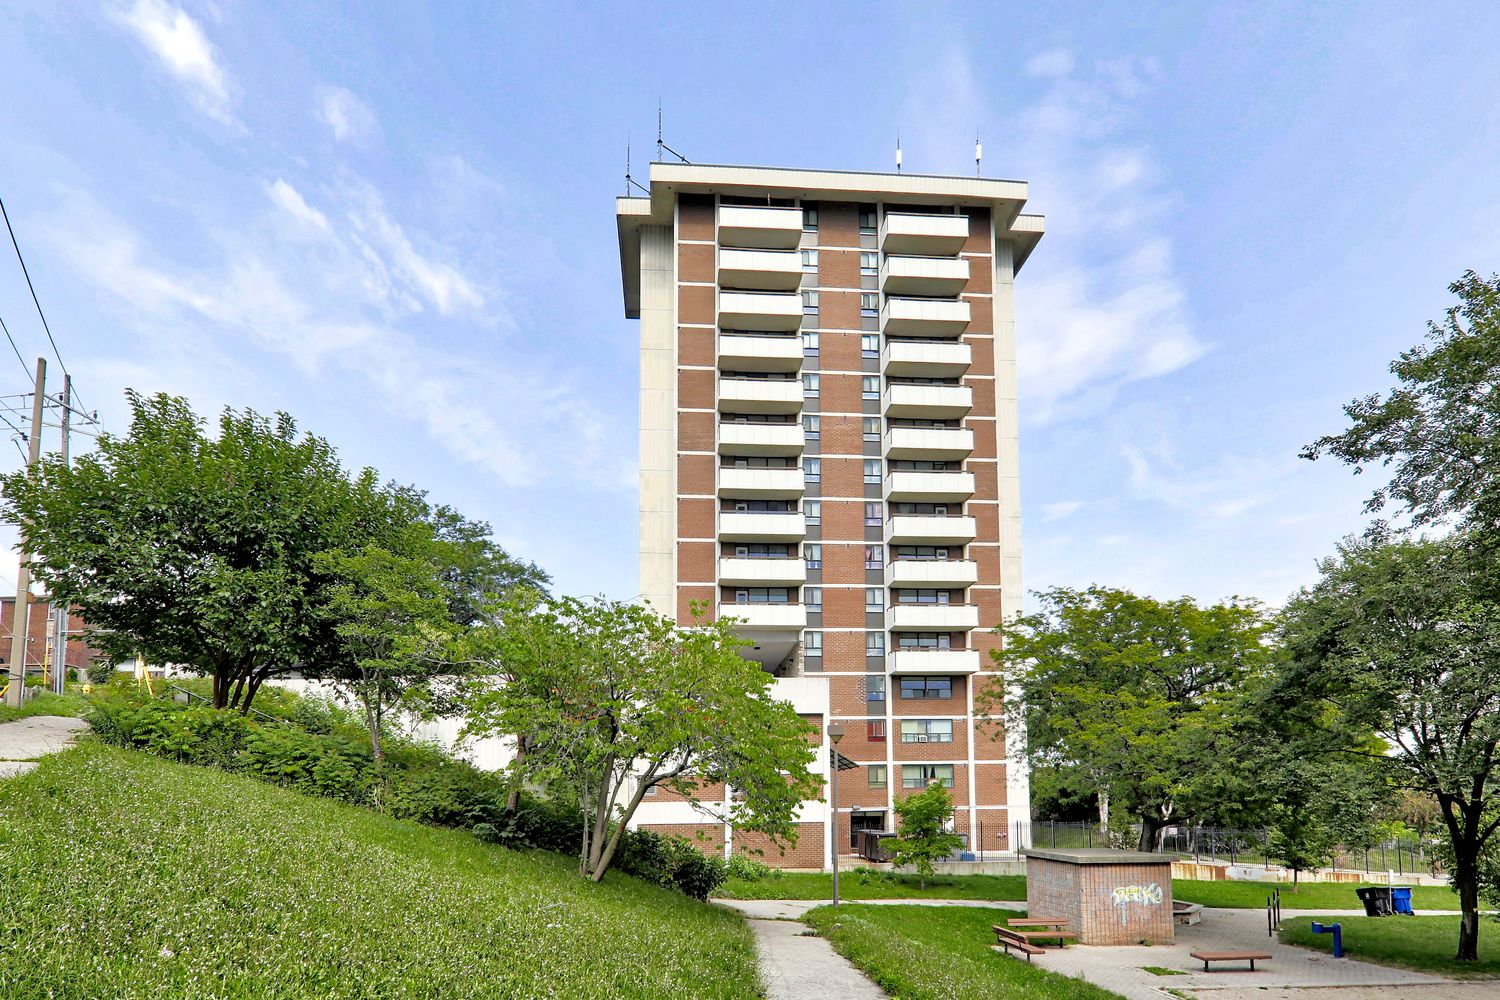 541 Blackthorn Ave. This condo at Blackthorn Manor is located in  York Crosstown, Toronto - image #2 of 7 by Strata.ca